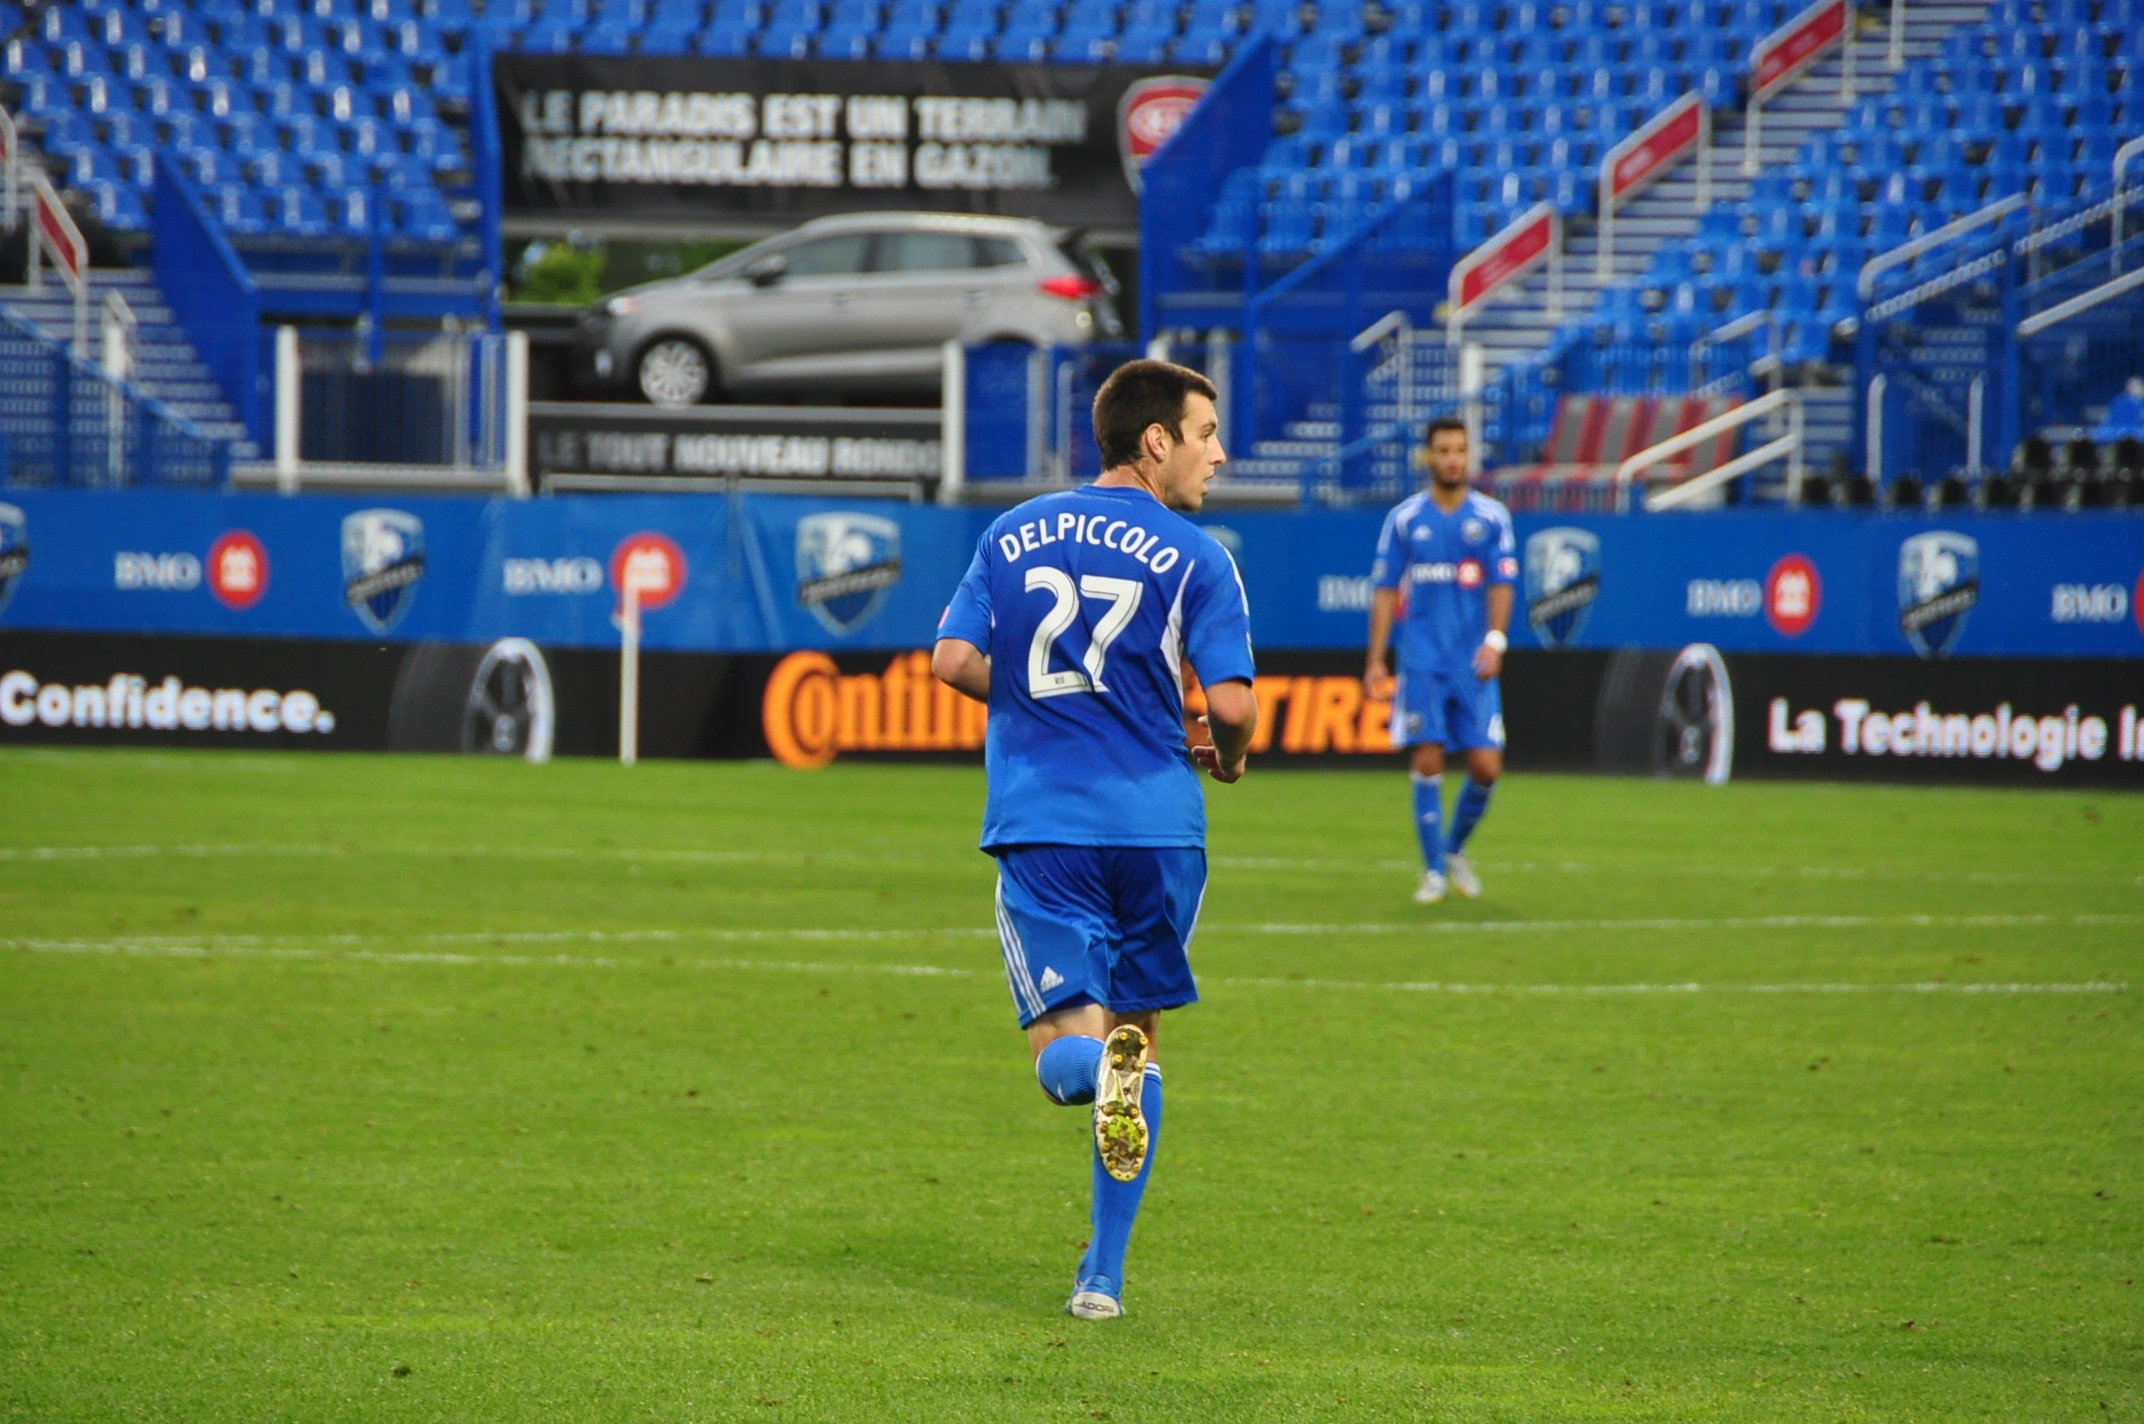 a soccer player on the field running and playing